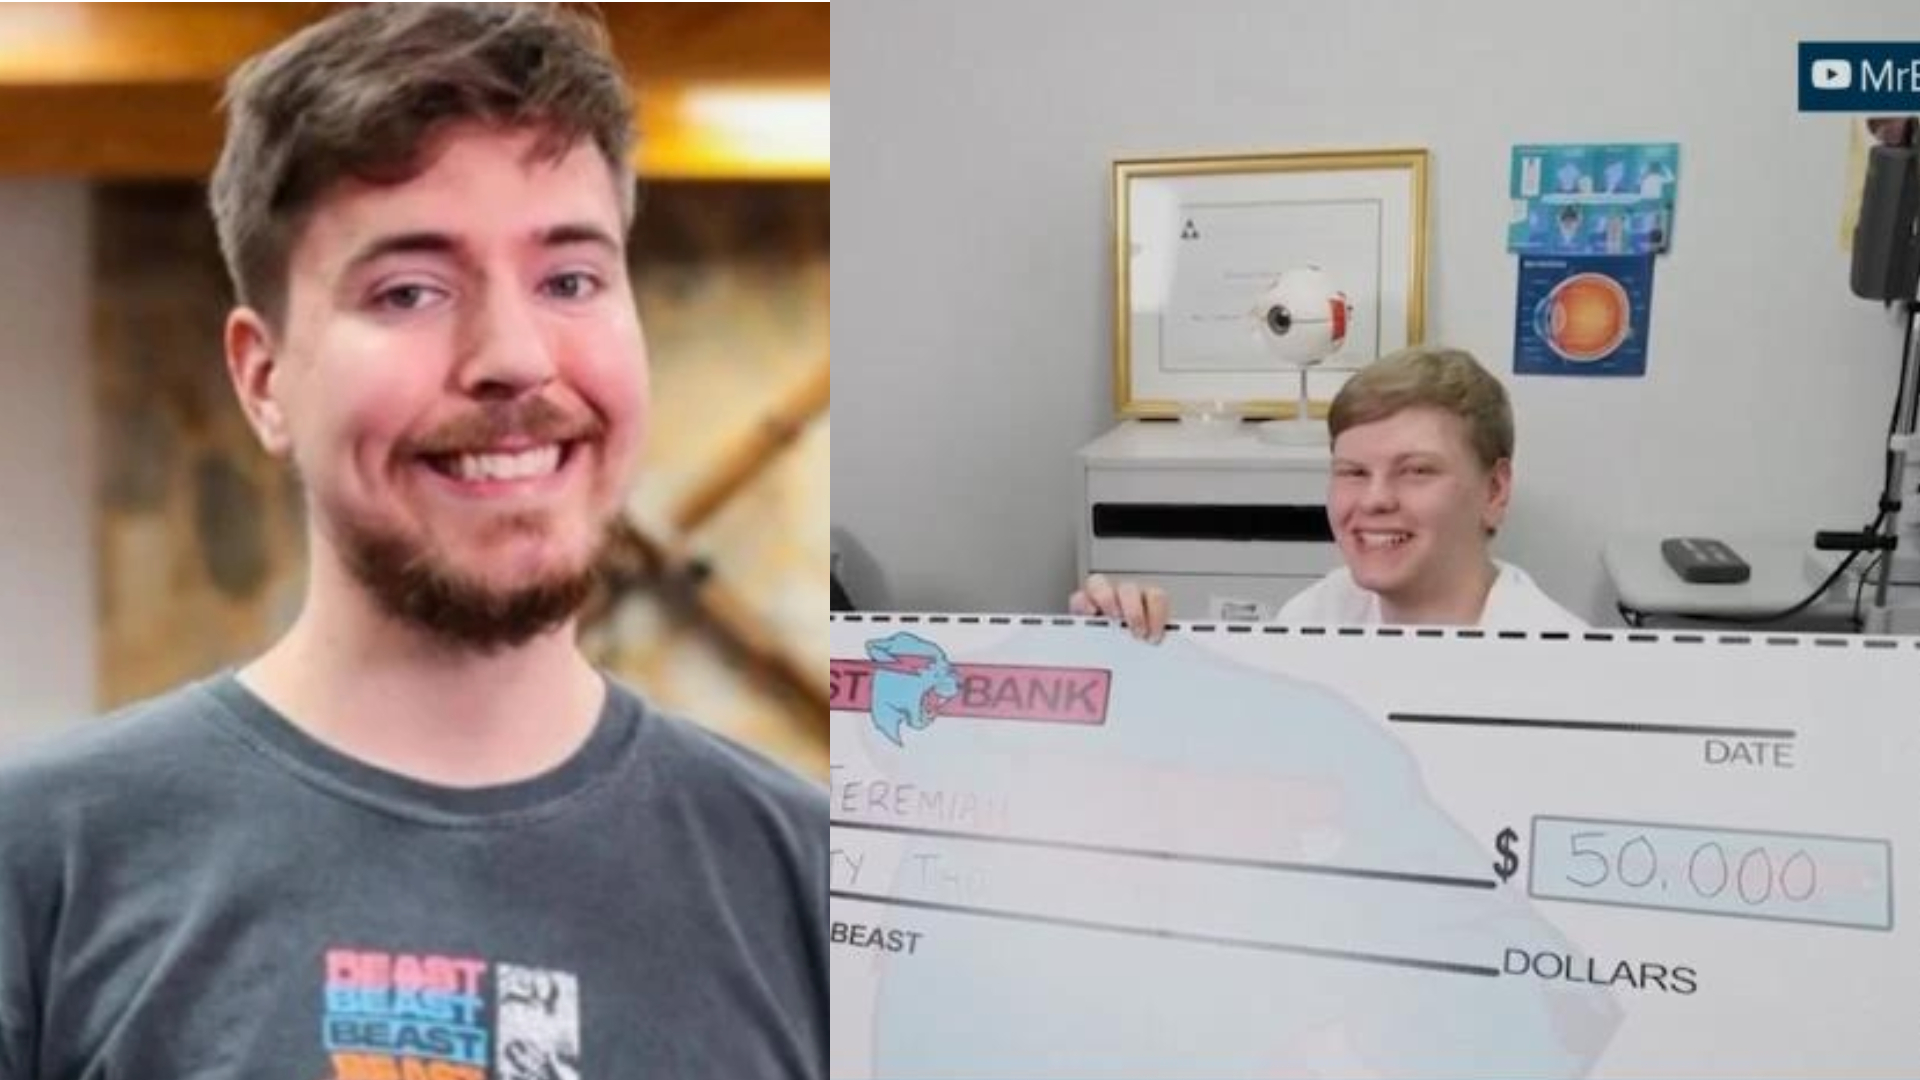 YouTube star MrBeast sponsors 1000 cataract surgeries to help patients see again